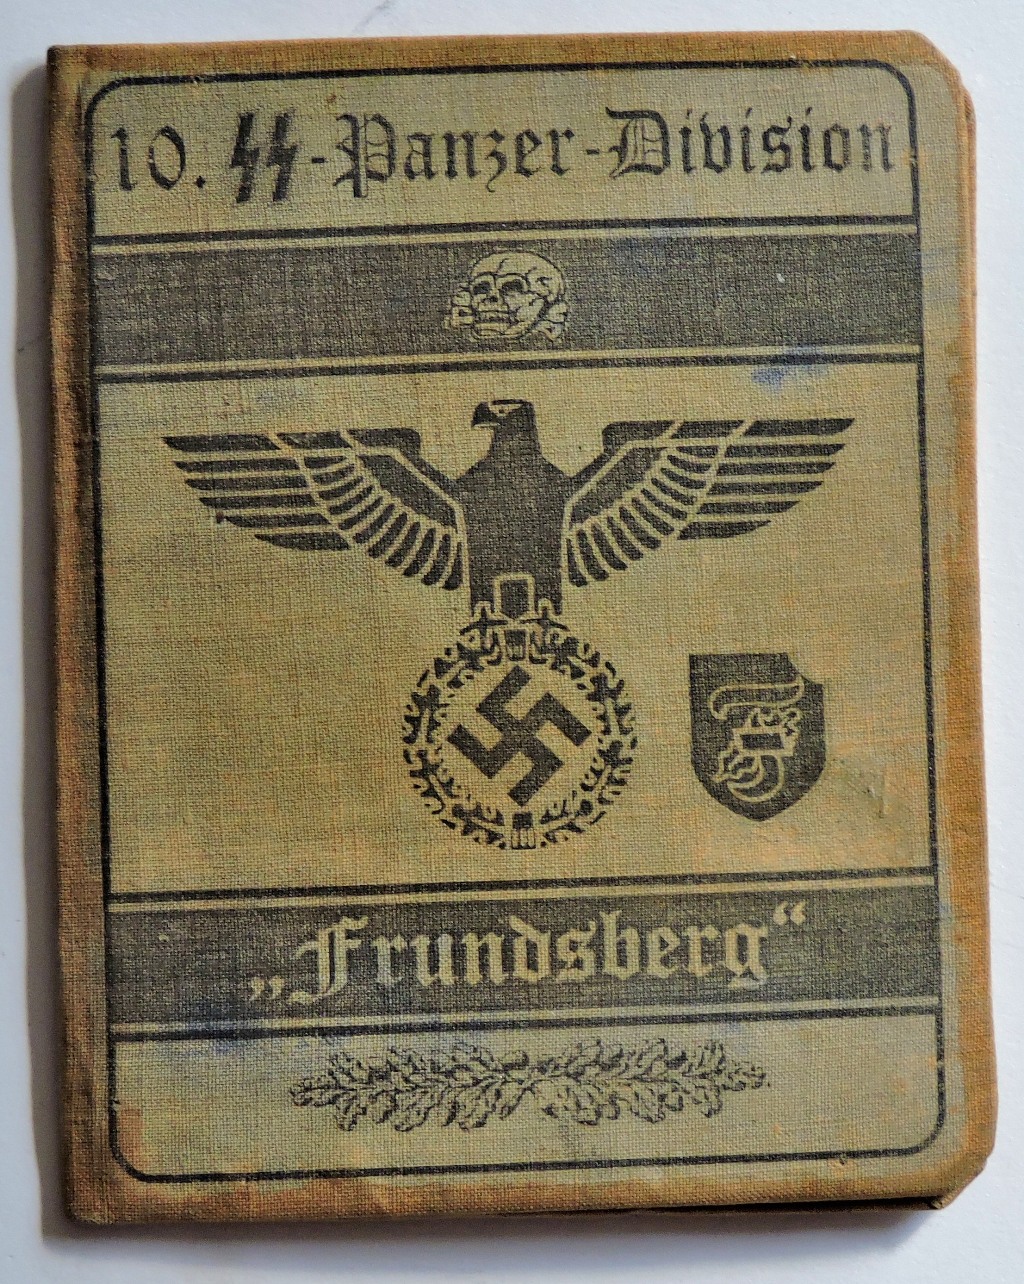 German SS Panzer Division 'Frundsberg' Identity Book for an NCO - Image 2 of 2